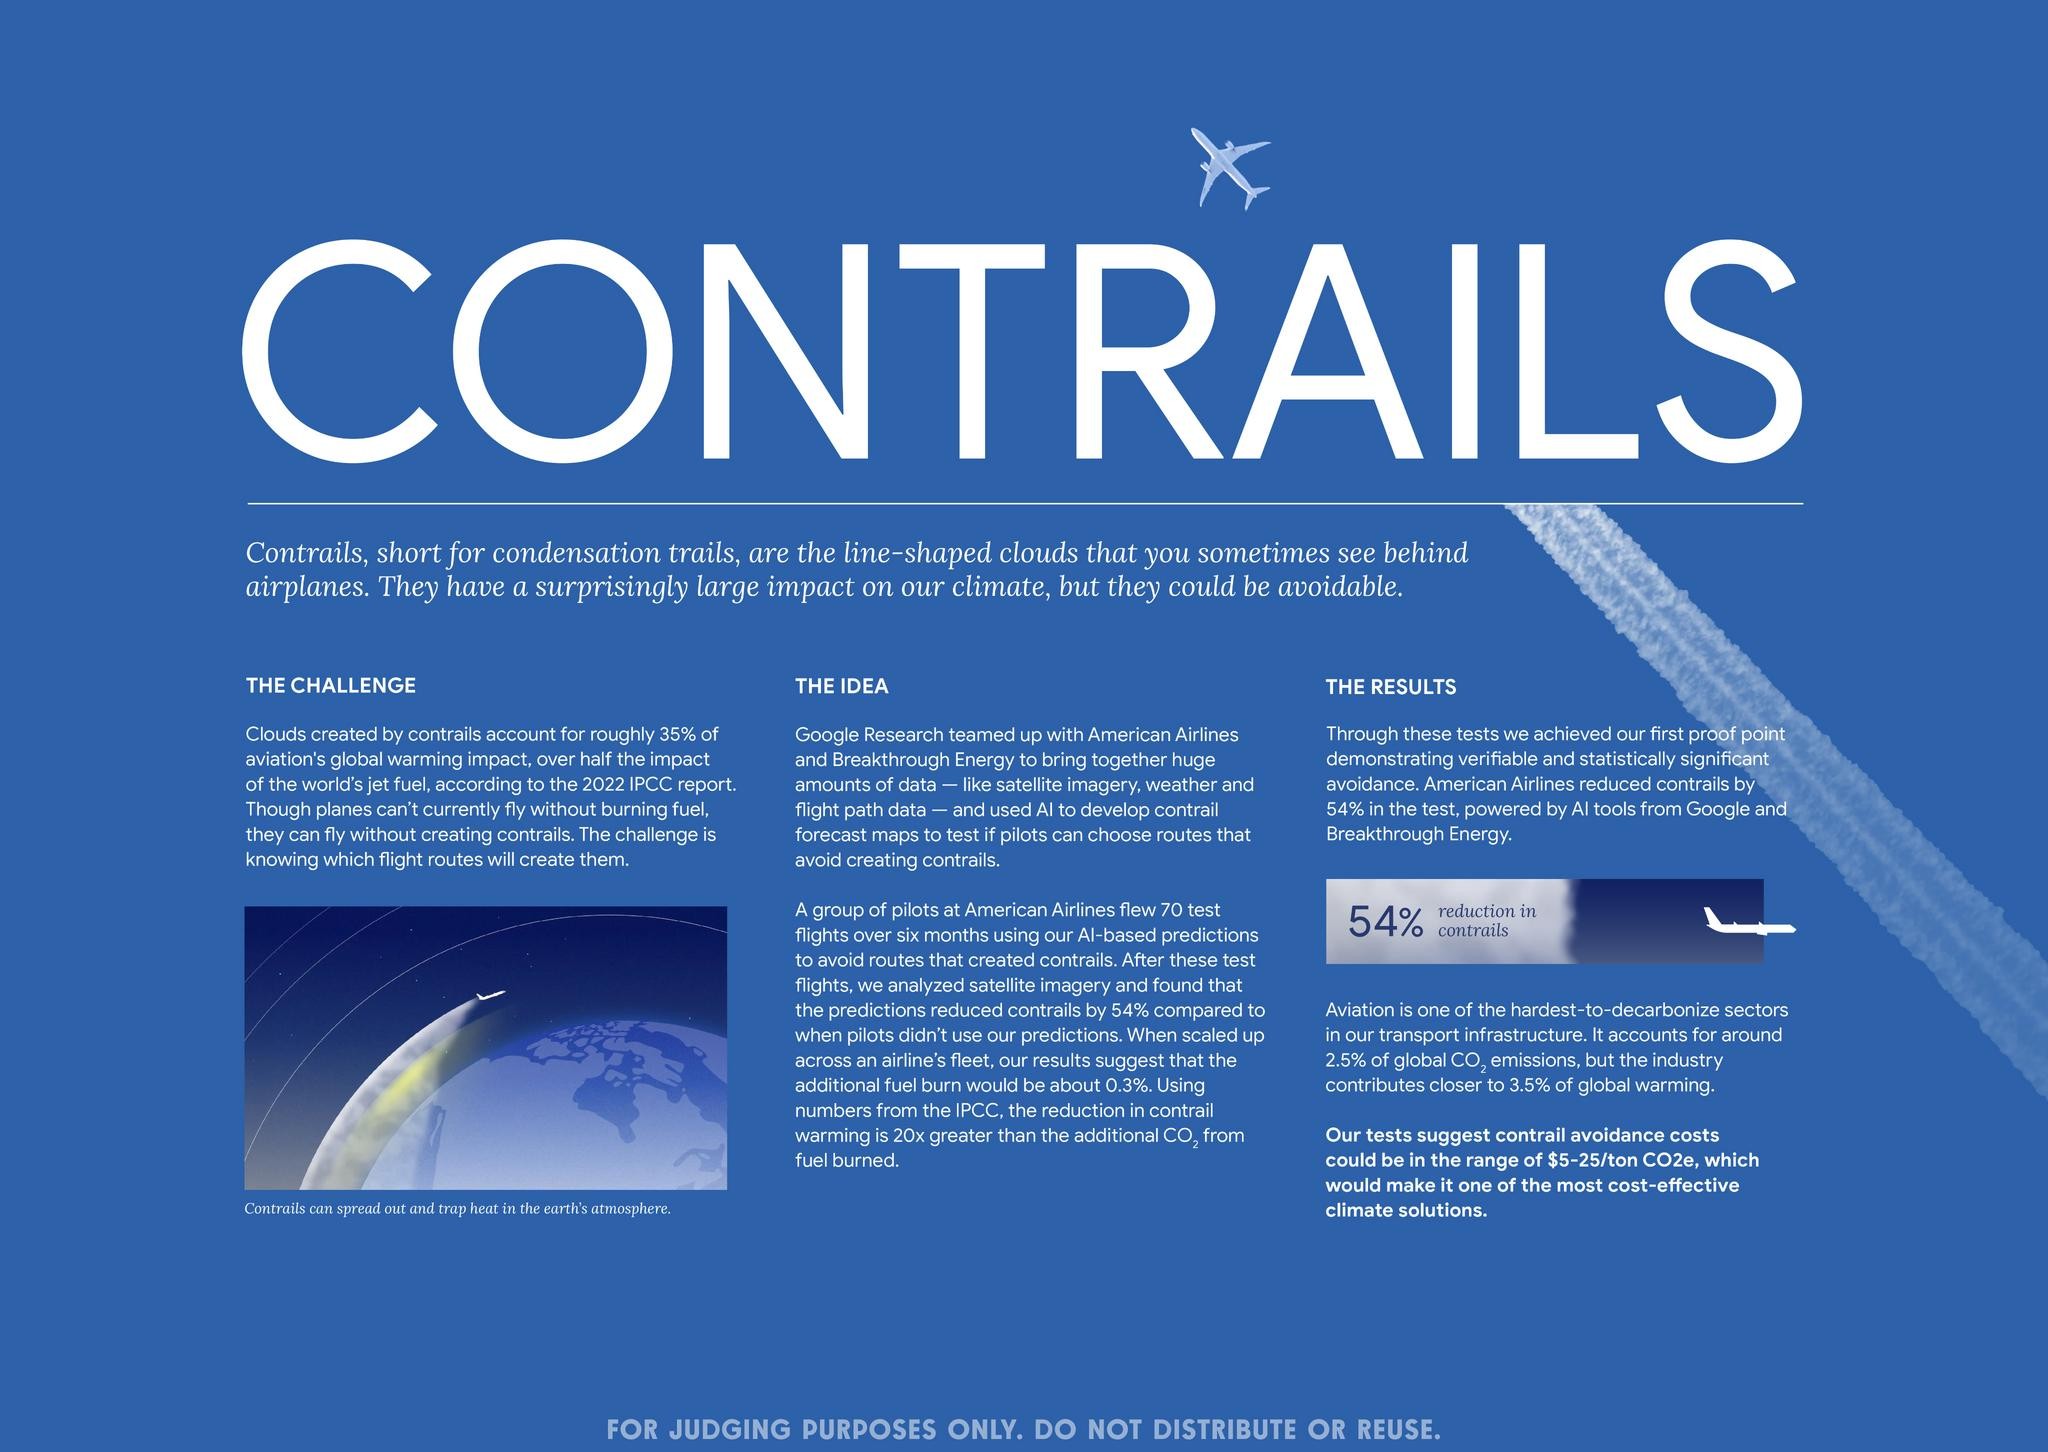 CONTRAILS: MAKING FLYING MORE SUSTAINABLE WITH GOOGLE AI